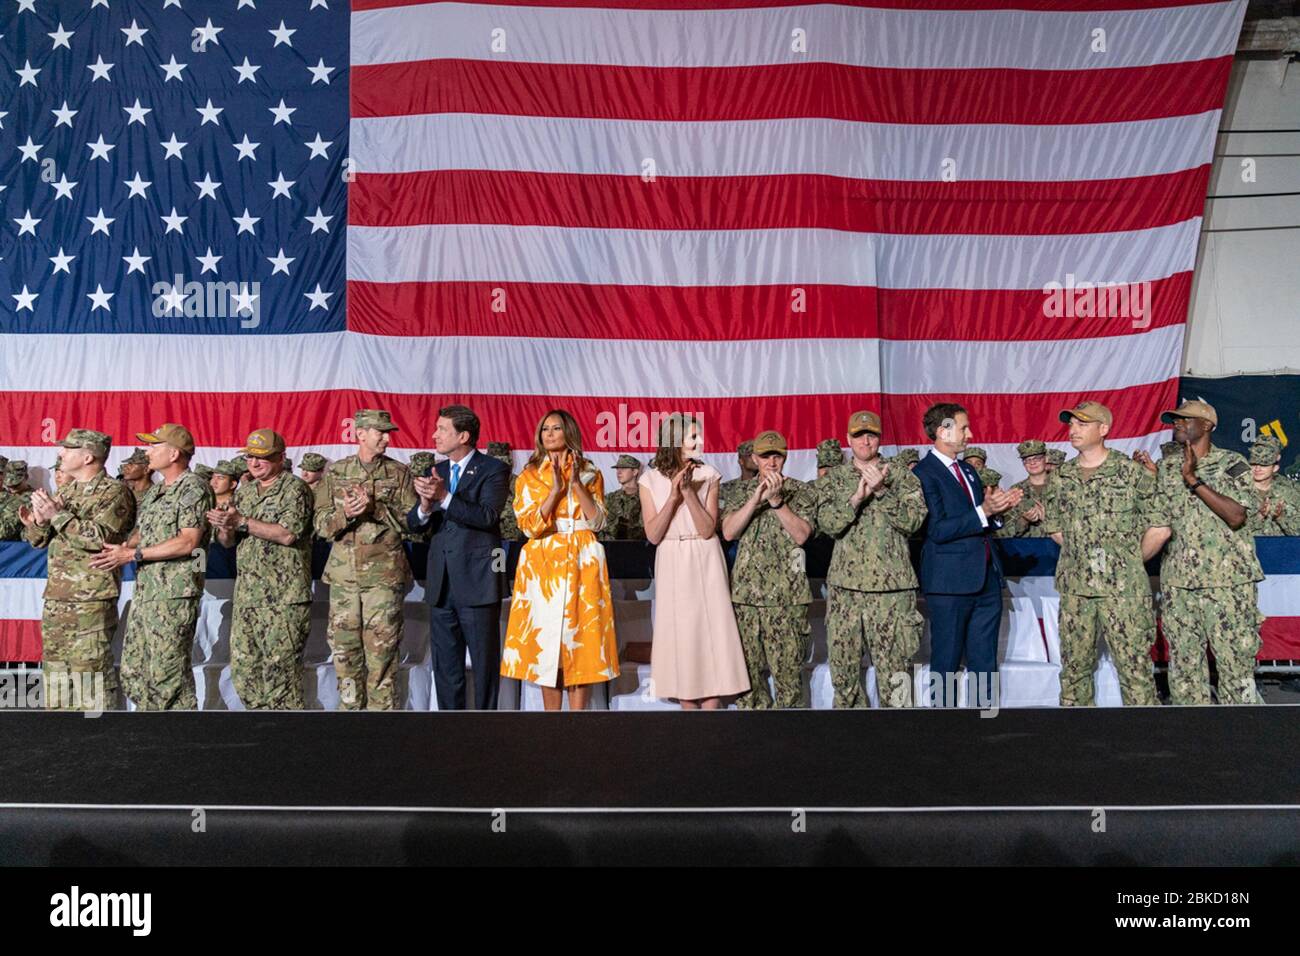 First Lady Melania Trump, alongside U.S. Ambassador to Japan William Hagerty, his wife, Mrs. Chrissy Hagerty, and U.S. Air Force Lt. Gen. Kevin Schneider, Commander of the U.S. Forces Japan, applauds as President Donald J. Trump delivers remarks during a Memorial Day address to the troops Tuesday, May 28, 2019, aboard the USS Wasp in Yokosuka, Japan. President Trump and First Lady Melania Trump Aboard the USS WASP Stock Photo